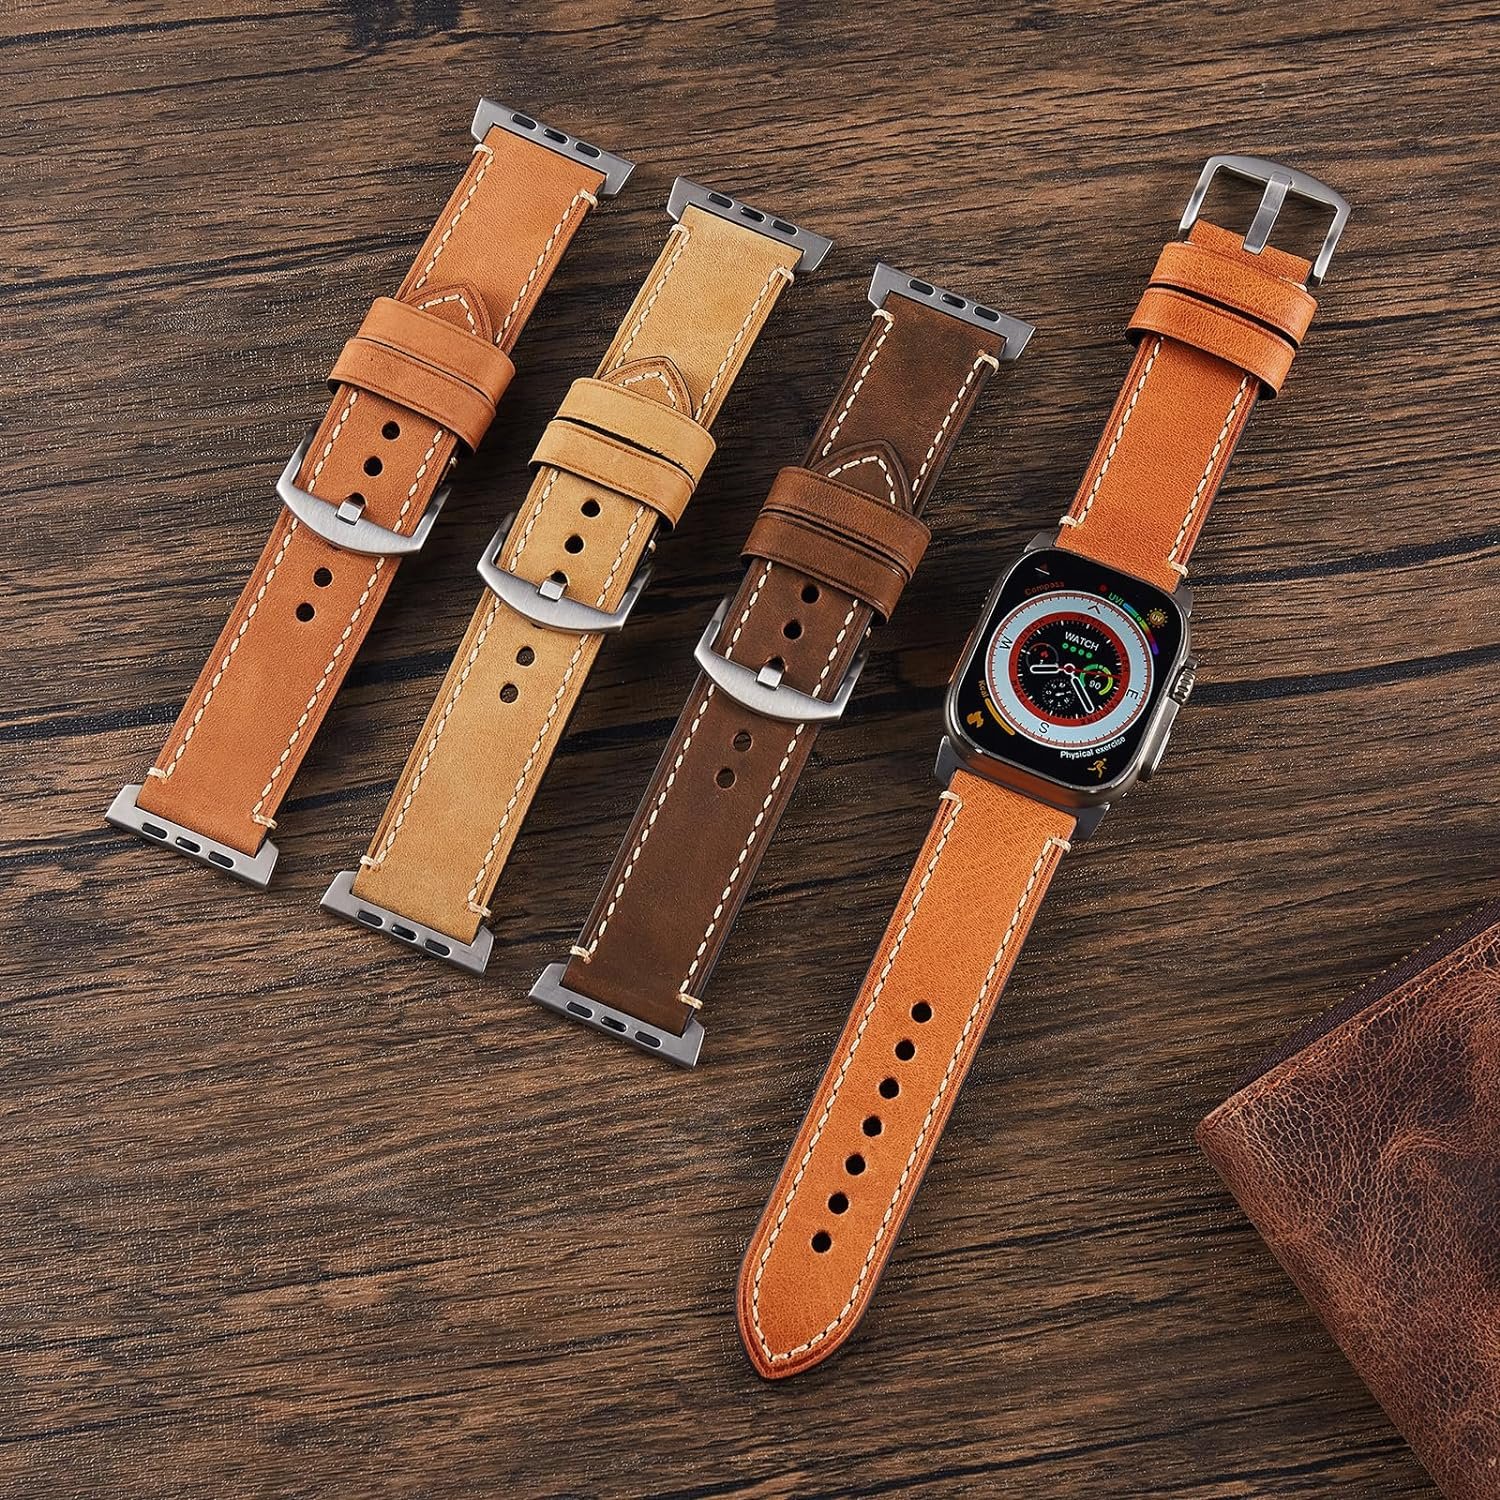 Apple Watch Ultra Leather Band Review